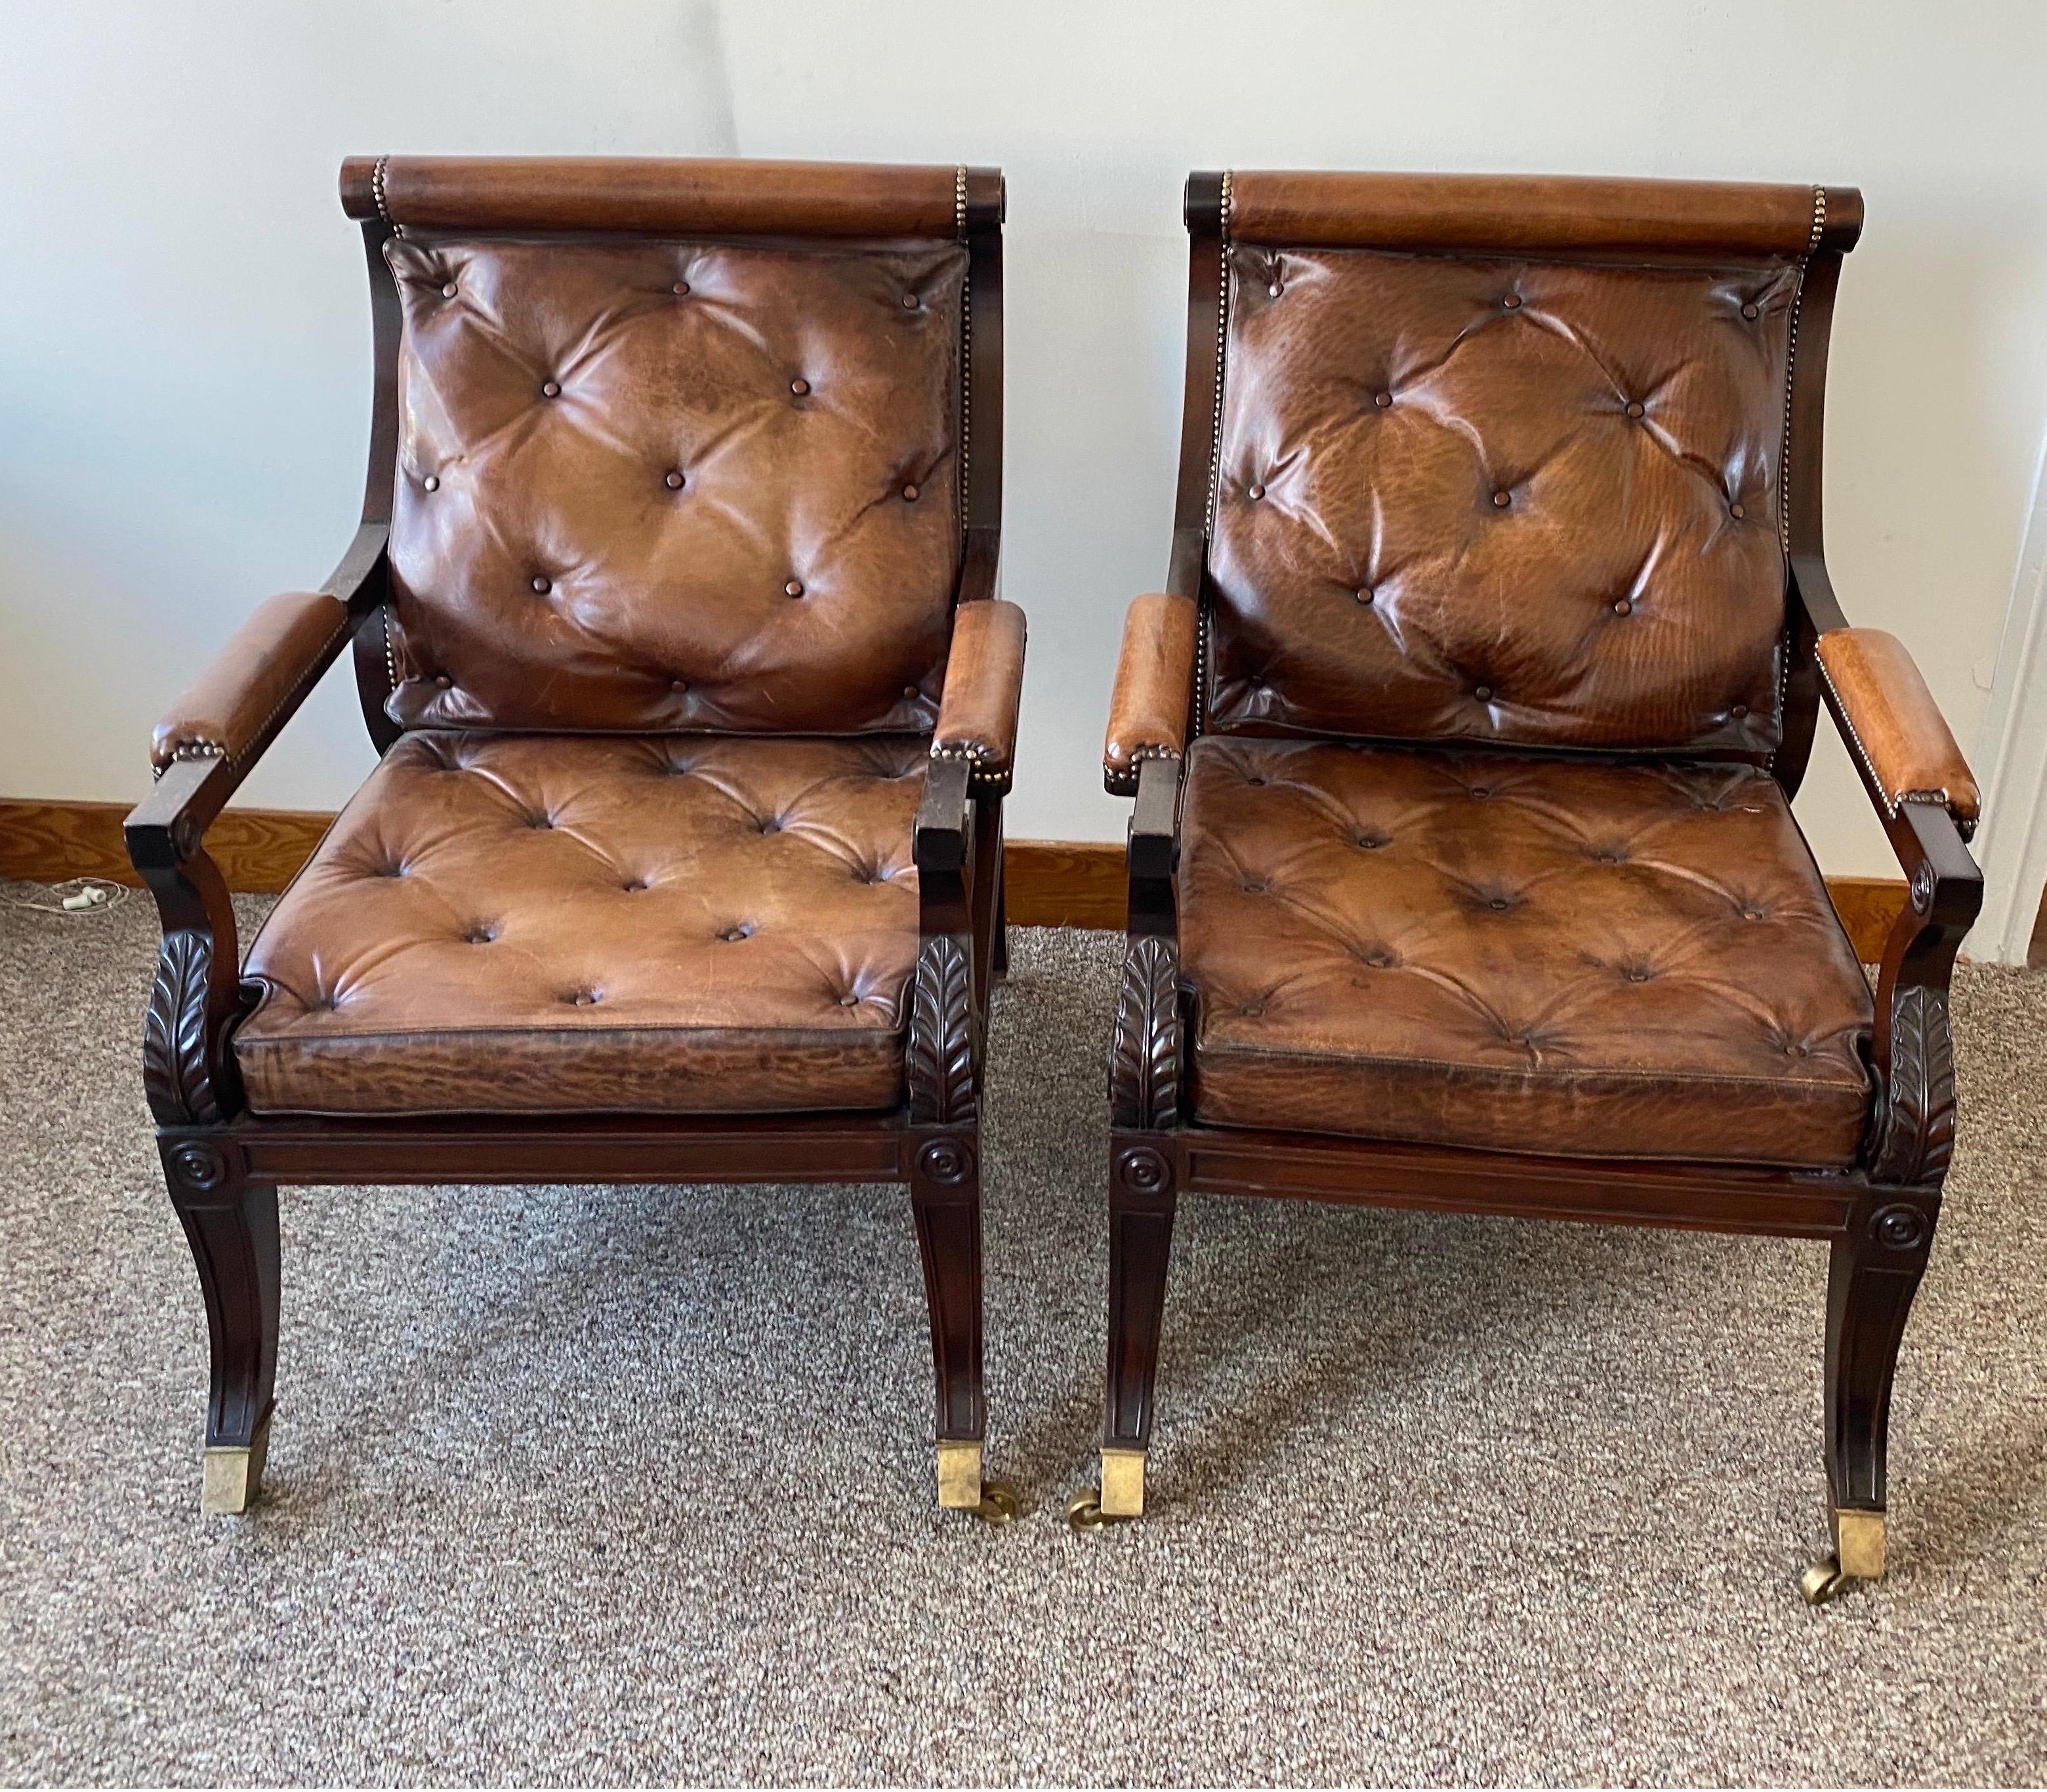 Superb pair of Regency style mahogany and leather library chairs, after Gillows. English. Nice, deep comfortable seats. Great castors. Perfectly worn leather.